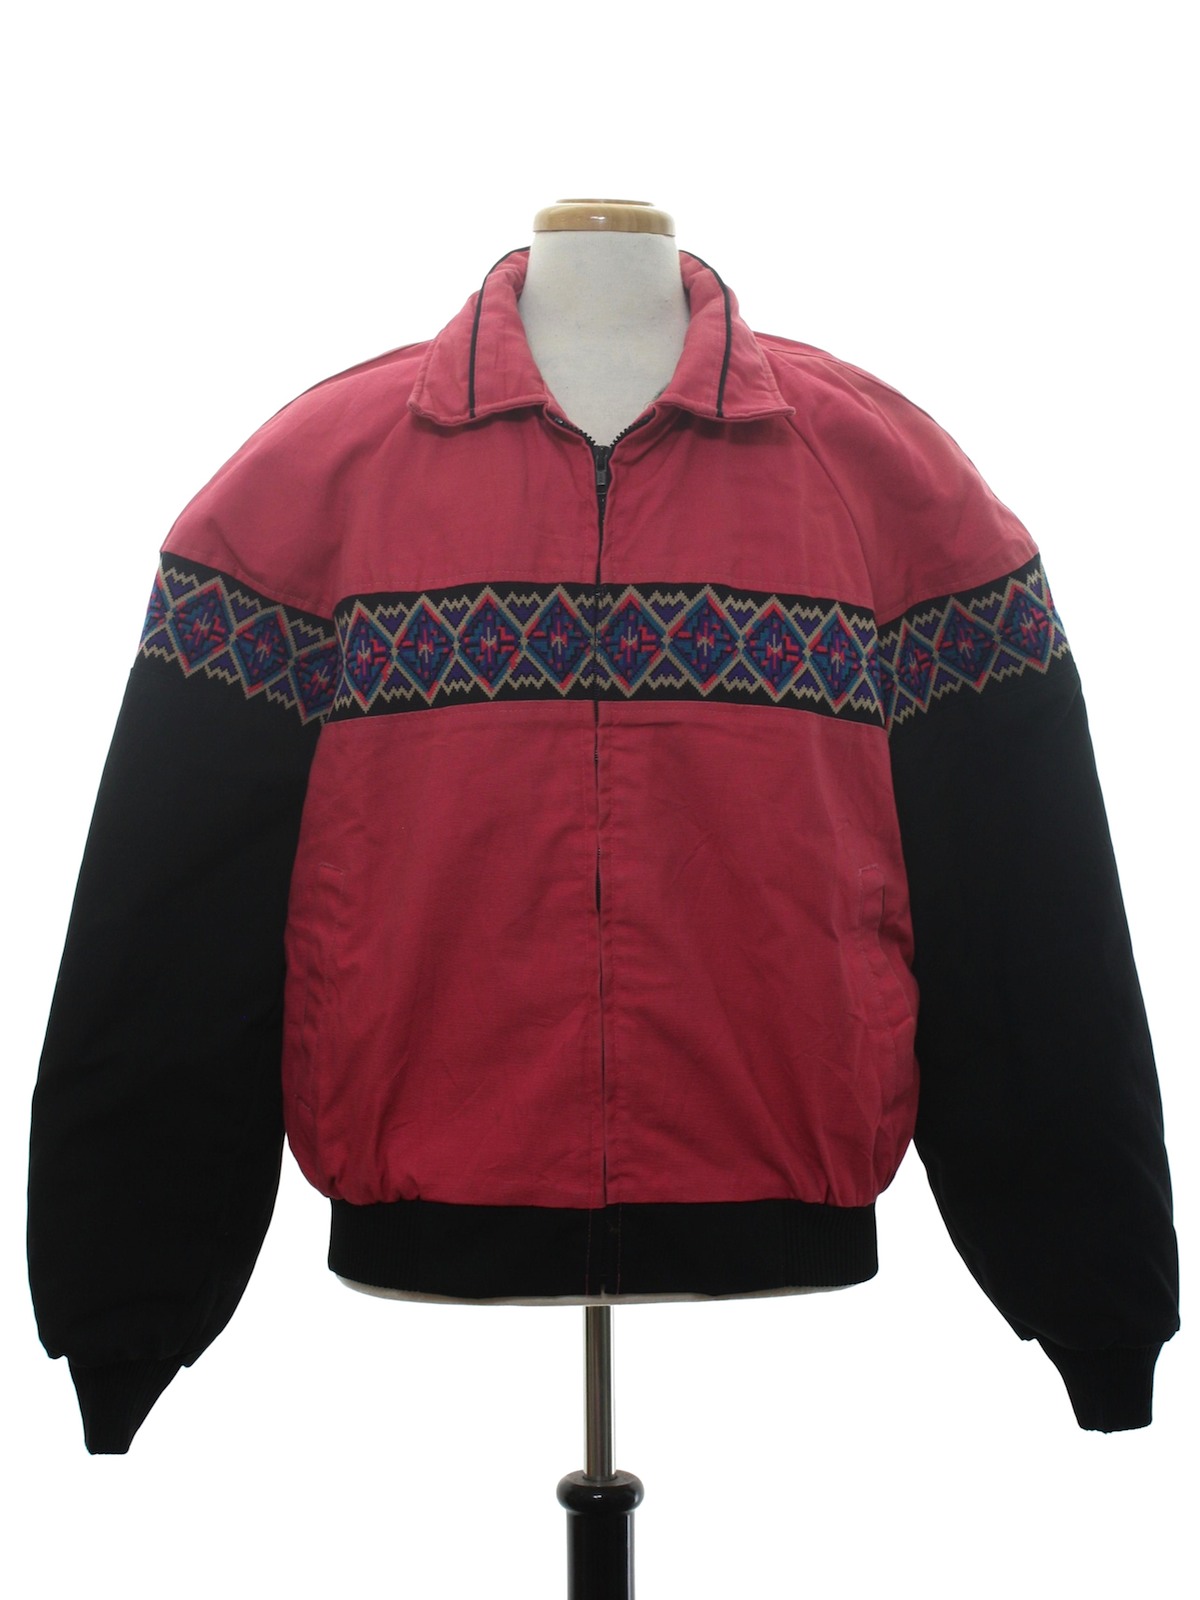 Retro 80's Jacket: 80s -Deuces And Jacks- Mens background, longsleeve, zippered front polyester cotton totally 80s western style jacket with fold over collar featuring purple, tan, black, pink and teal geometric